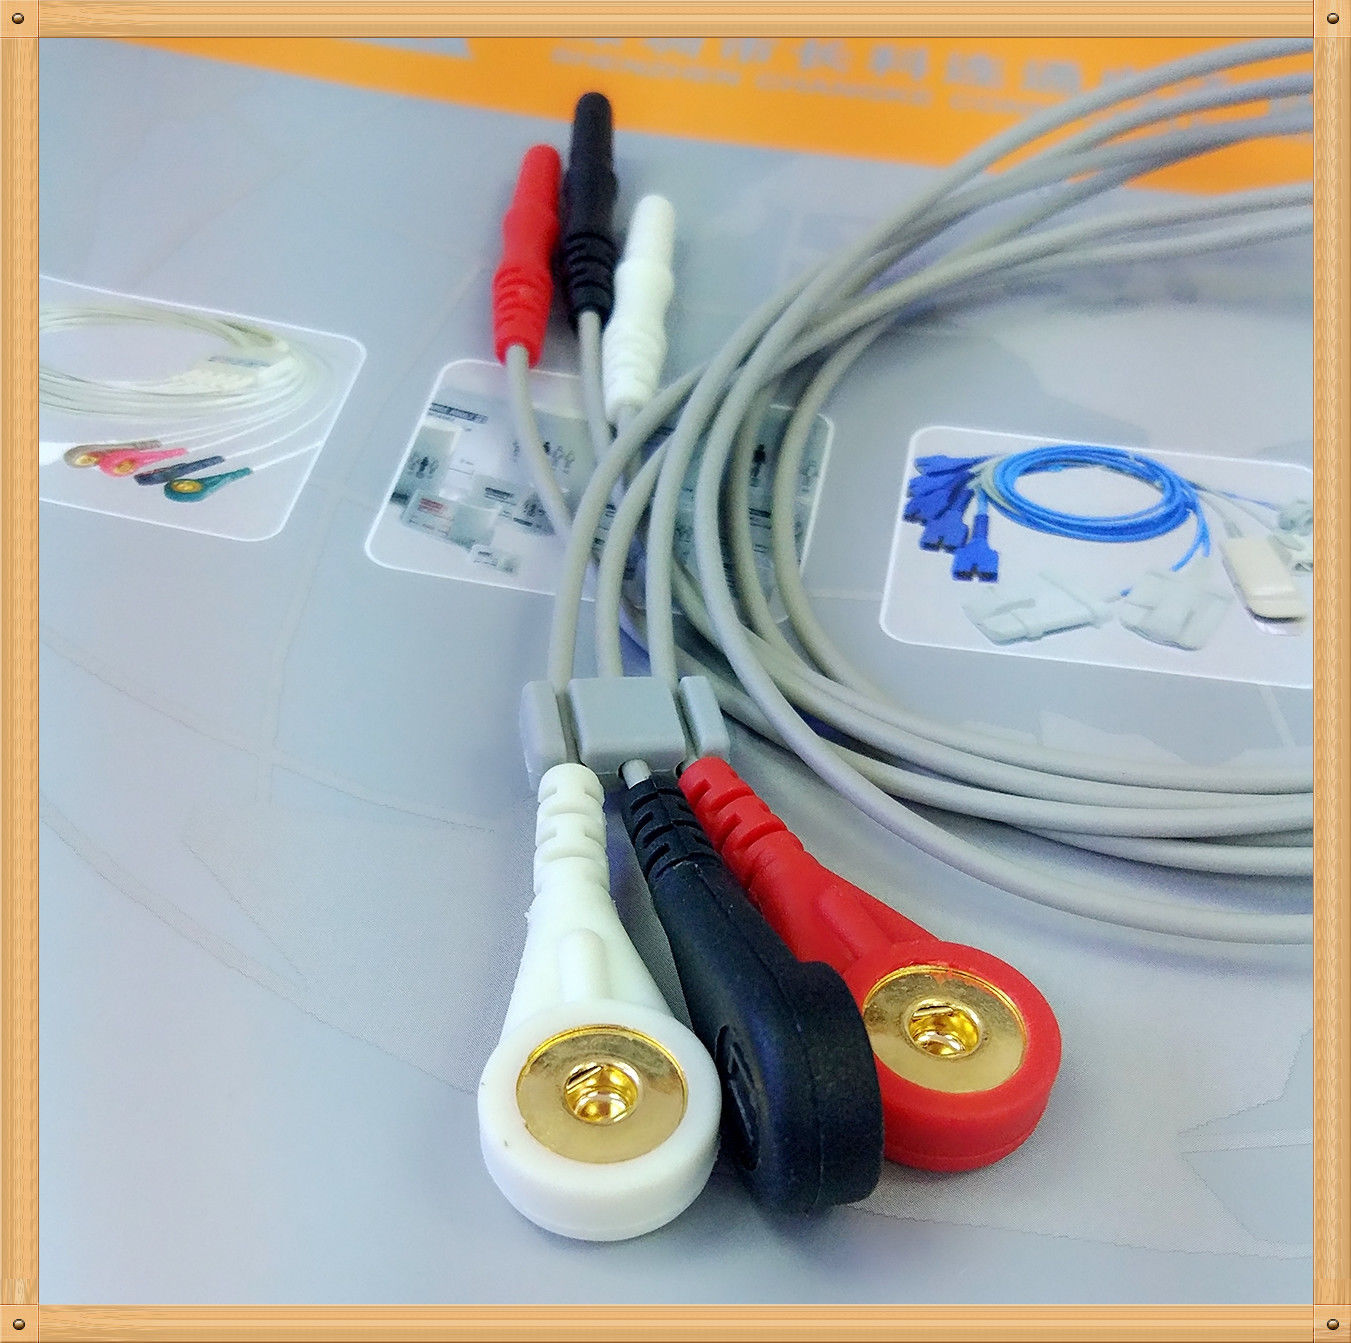 Din Style Safety ECG Leadwires 3 Leads,Grabber,AHA,L=0.7M DIAGNOSTIC ULTRASOUND MACHINES FOR SALE